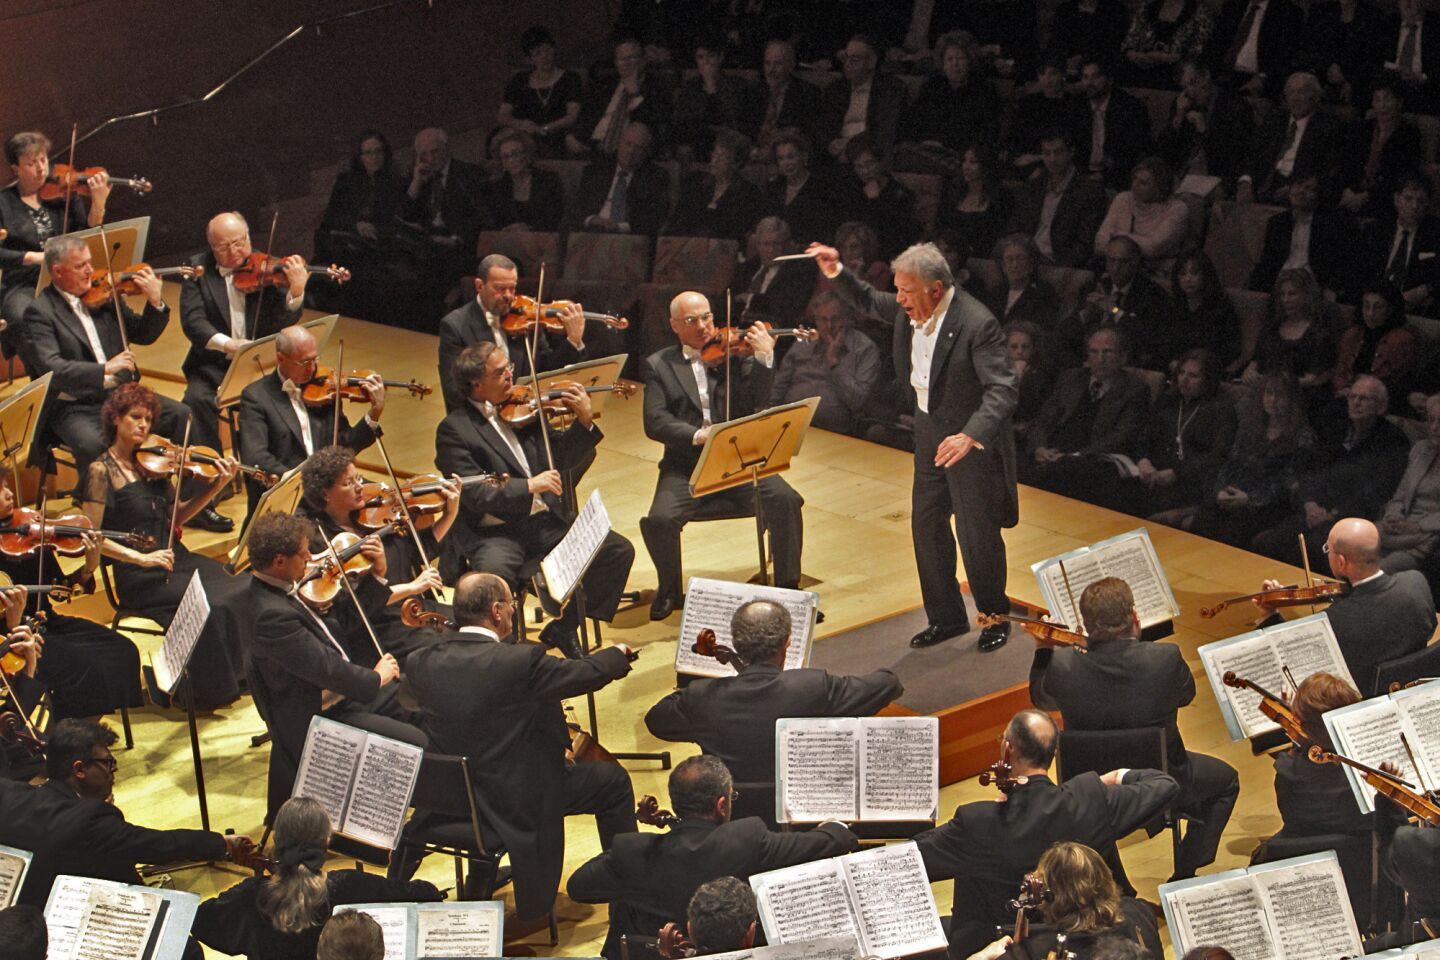 Arts and culture in pictures by The Times | Israel Philharmonic